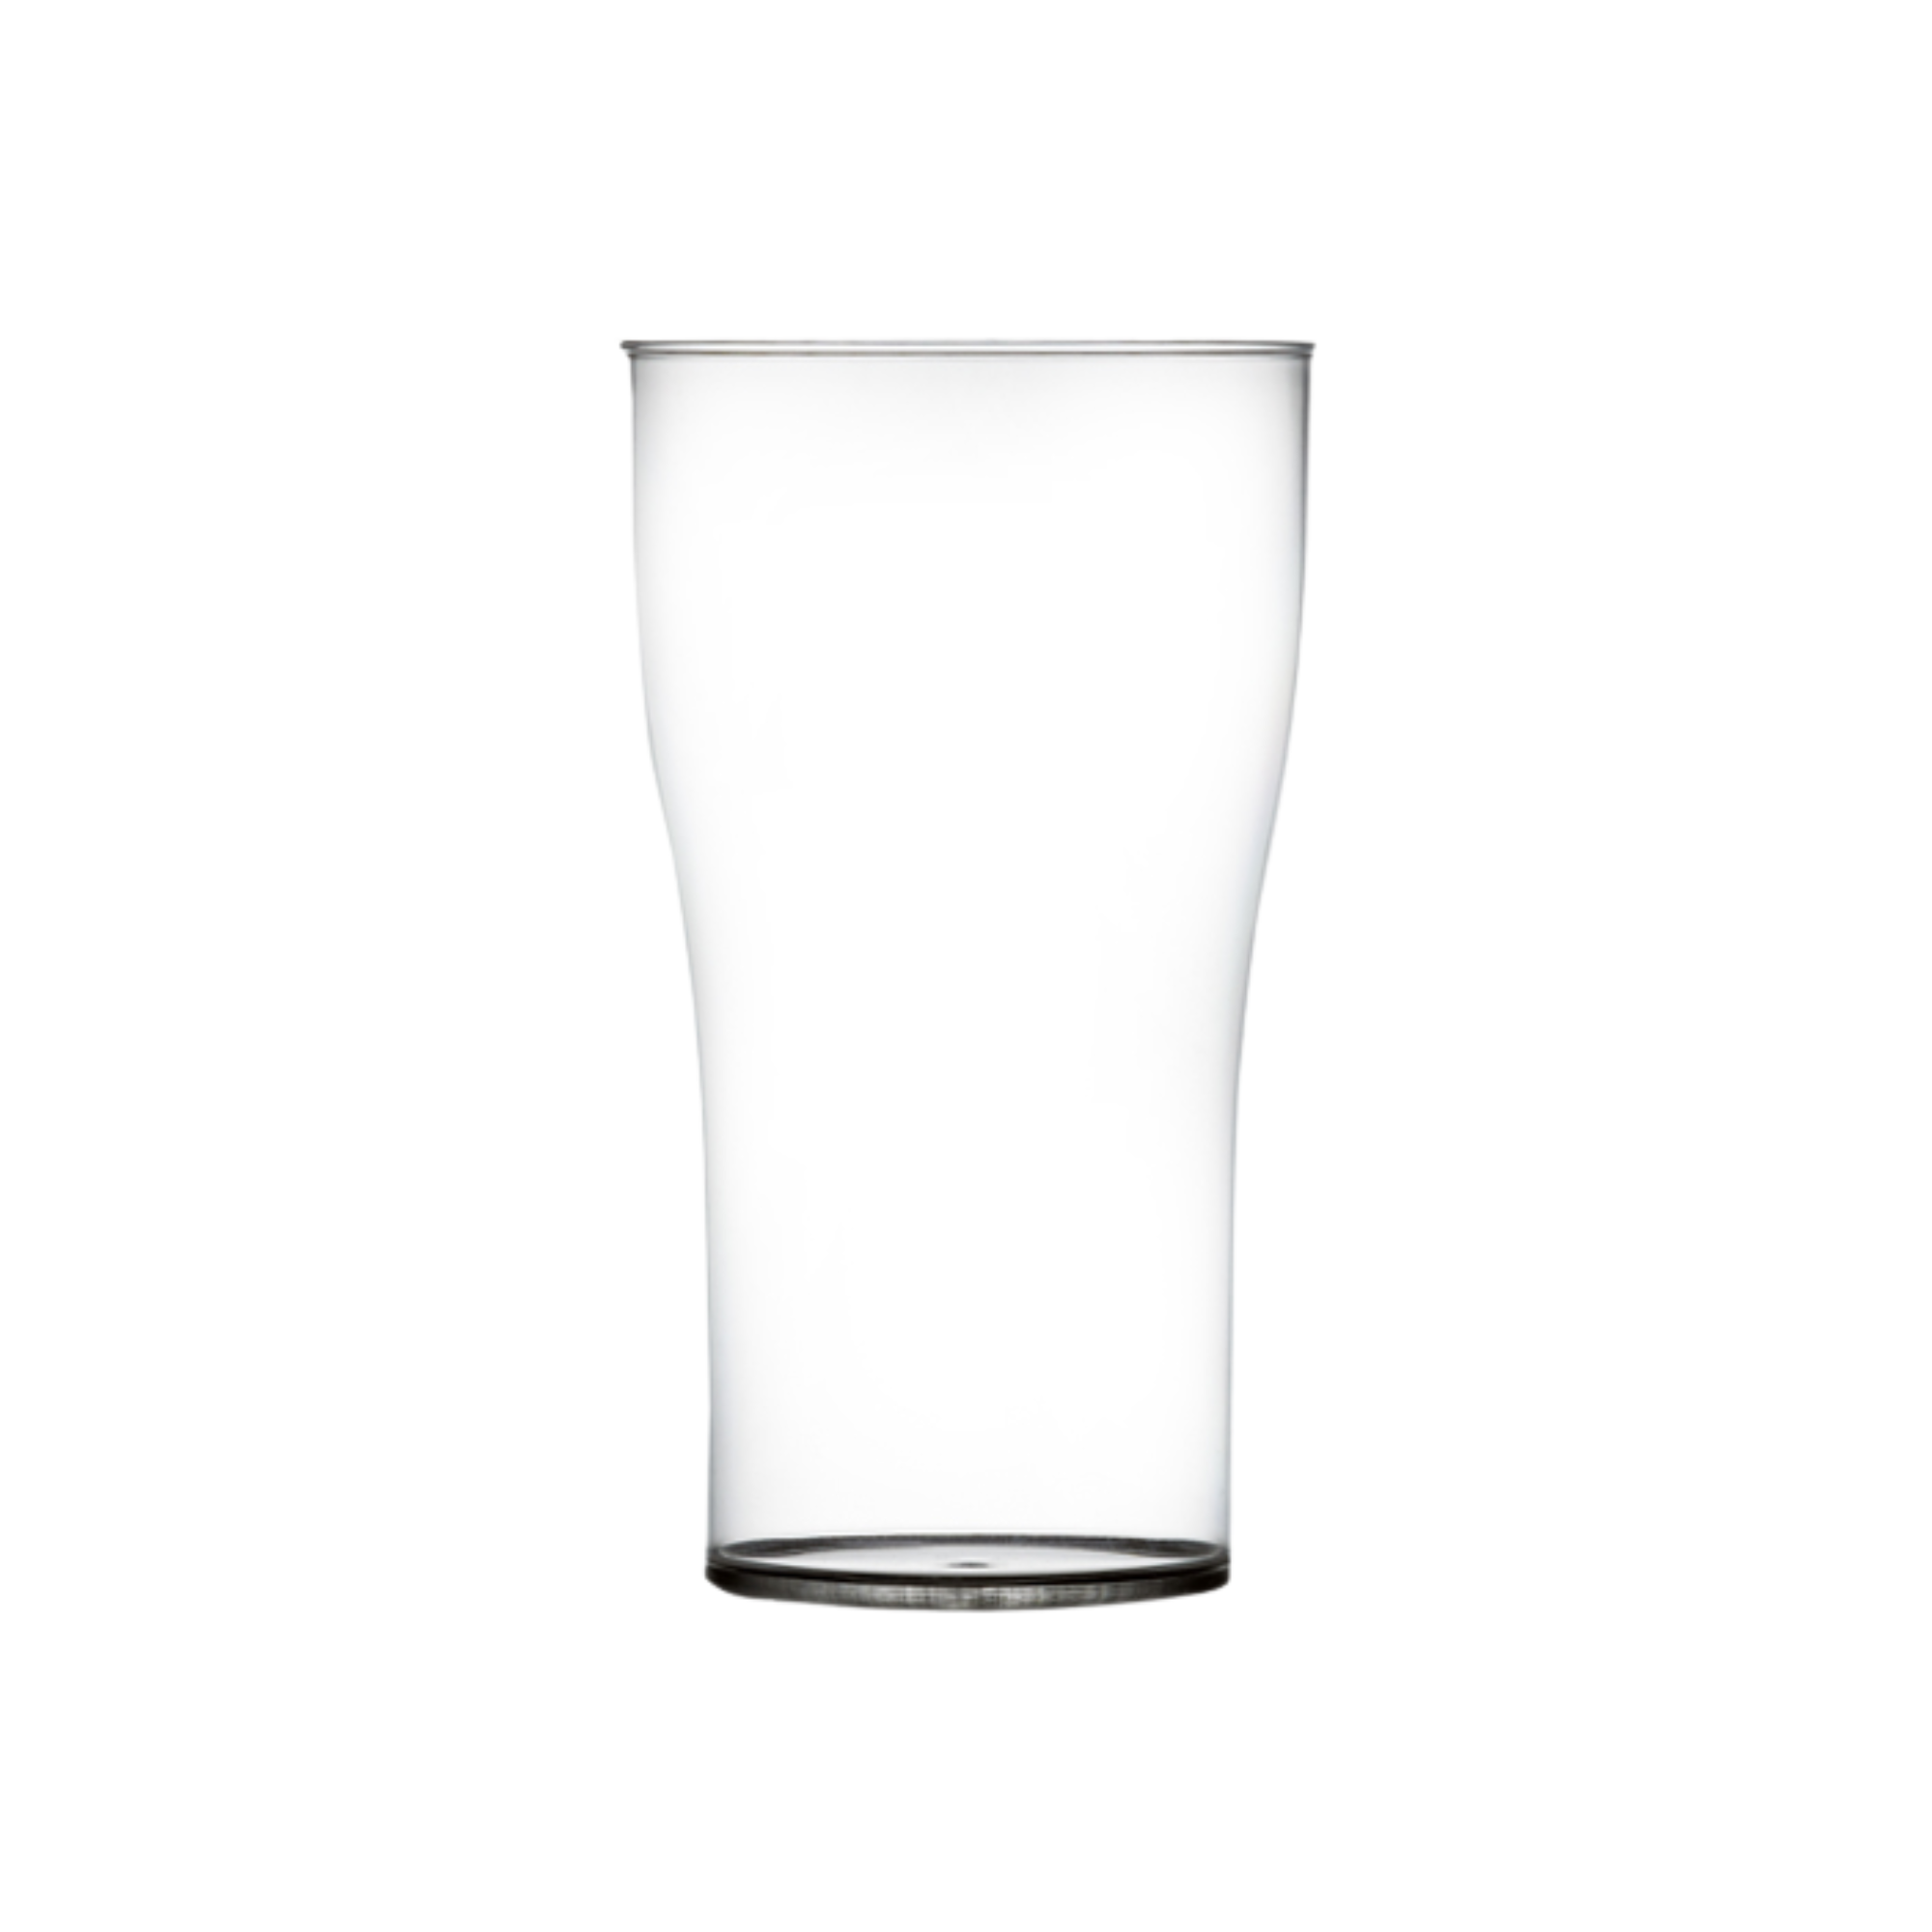 Elite Polycarbonate 2 Pint Nucleated Tulip Tumbler CE Plastic Beer Glass CE Marked at 2 Pints 